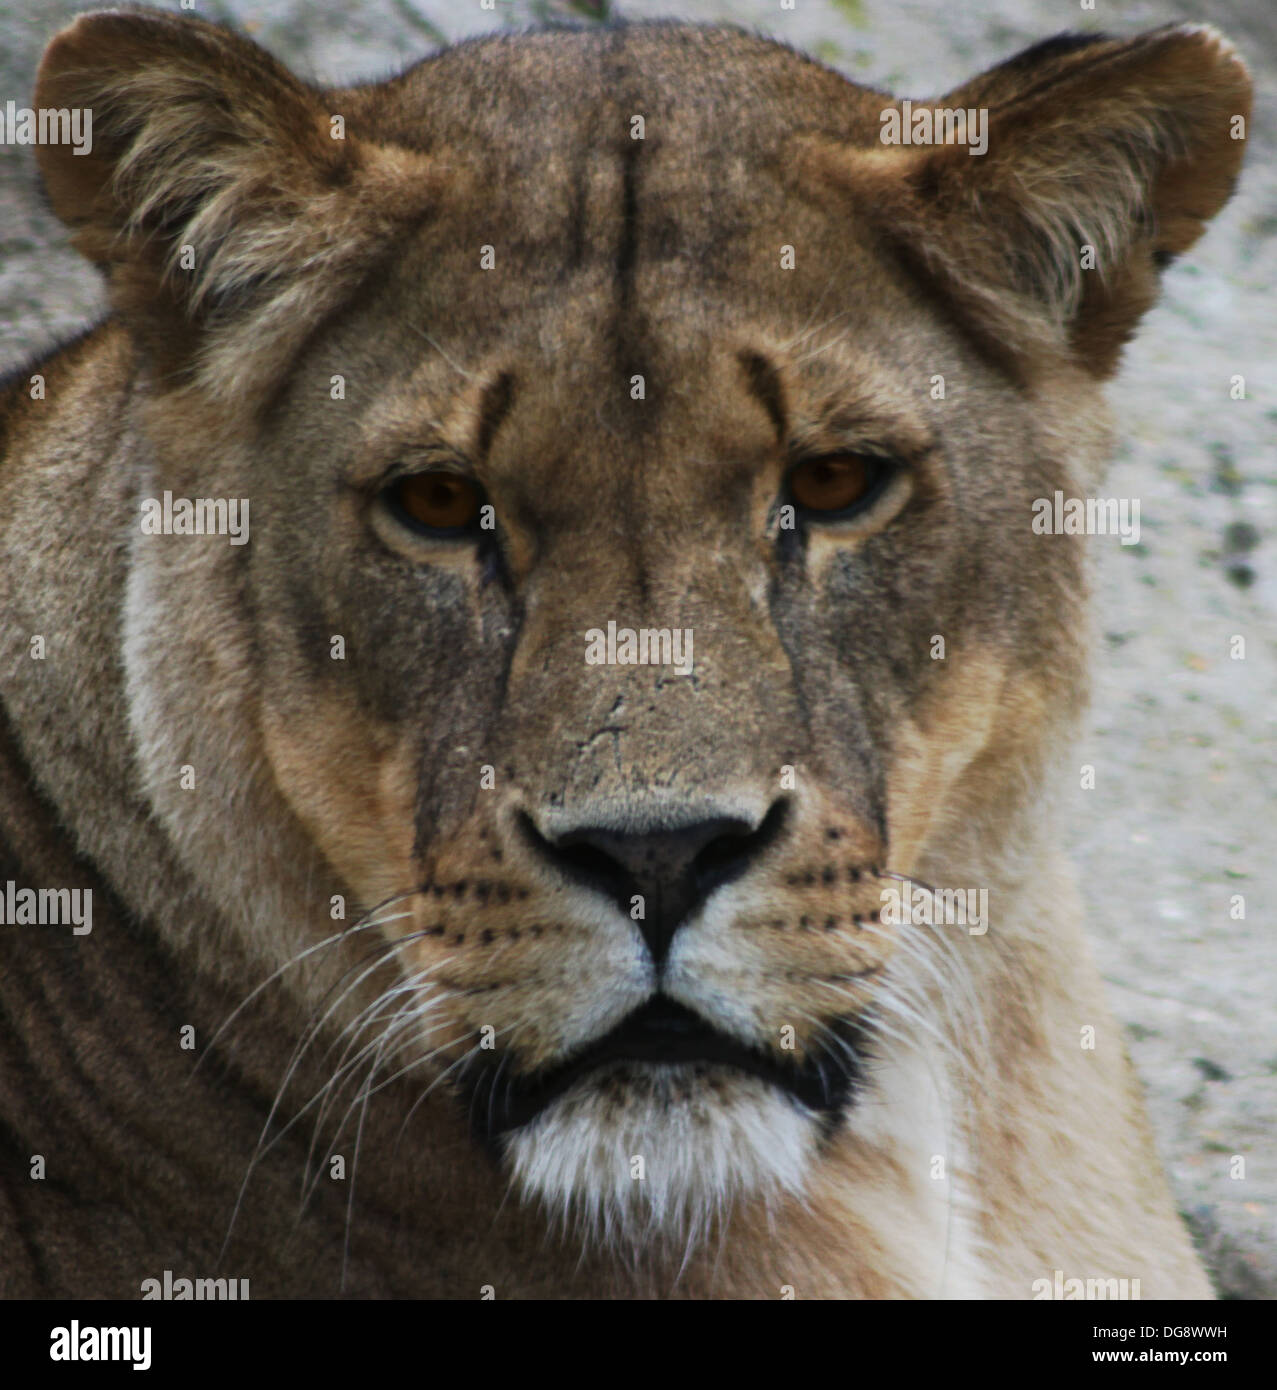 Lions are the largest mammalian predators in Africa, living on the open grasslands and plains. Stock Photo